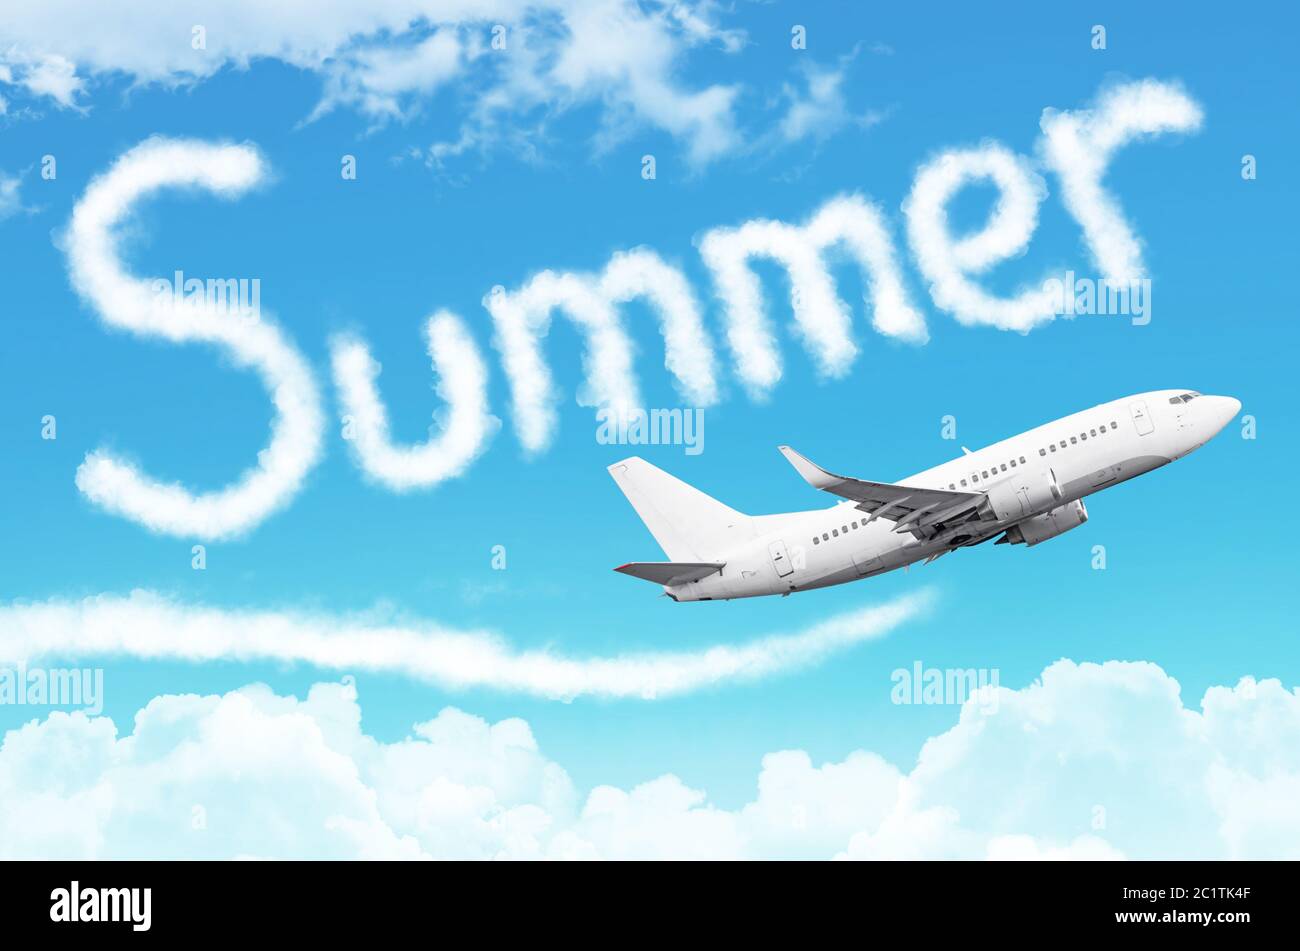 Word Summer drawn from clouds airplane in the blue sky, concept travel tourism holiday vacation Stock Photo